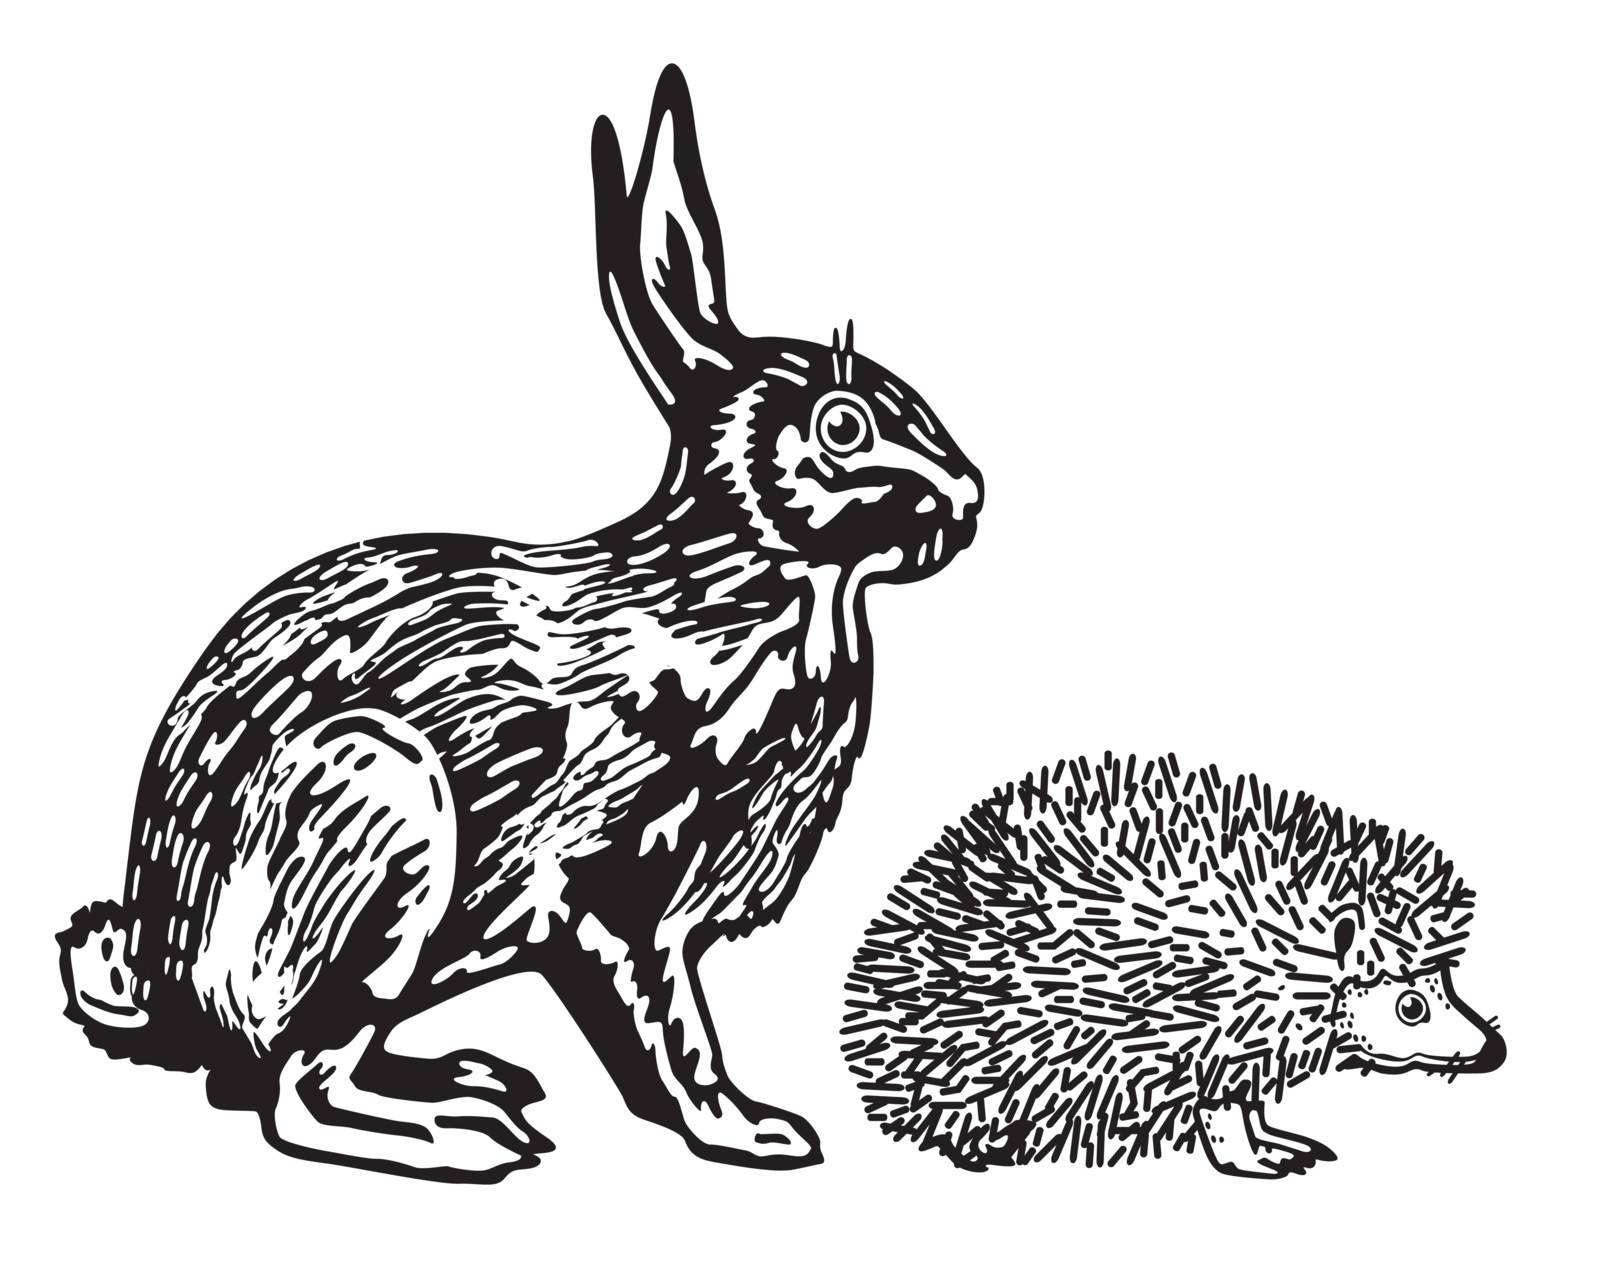 Hare and Hedgehog by scusi